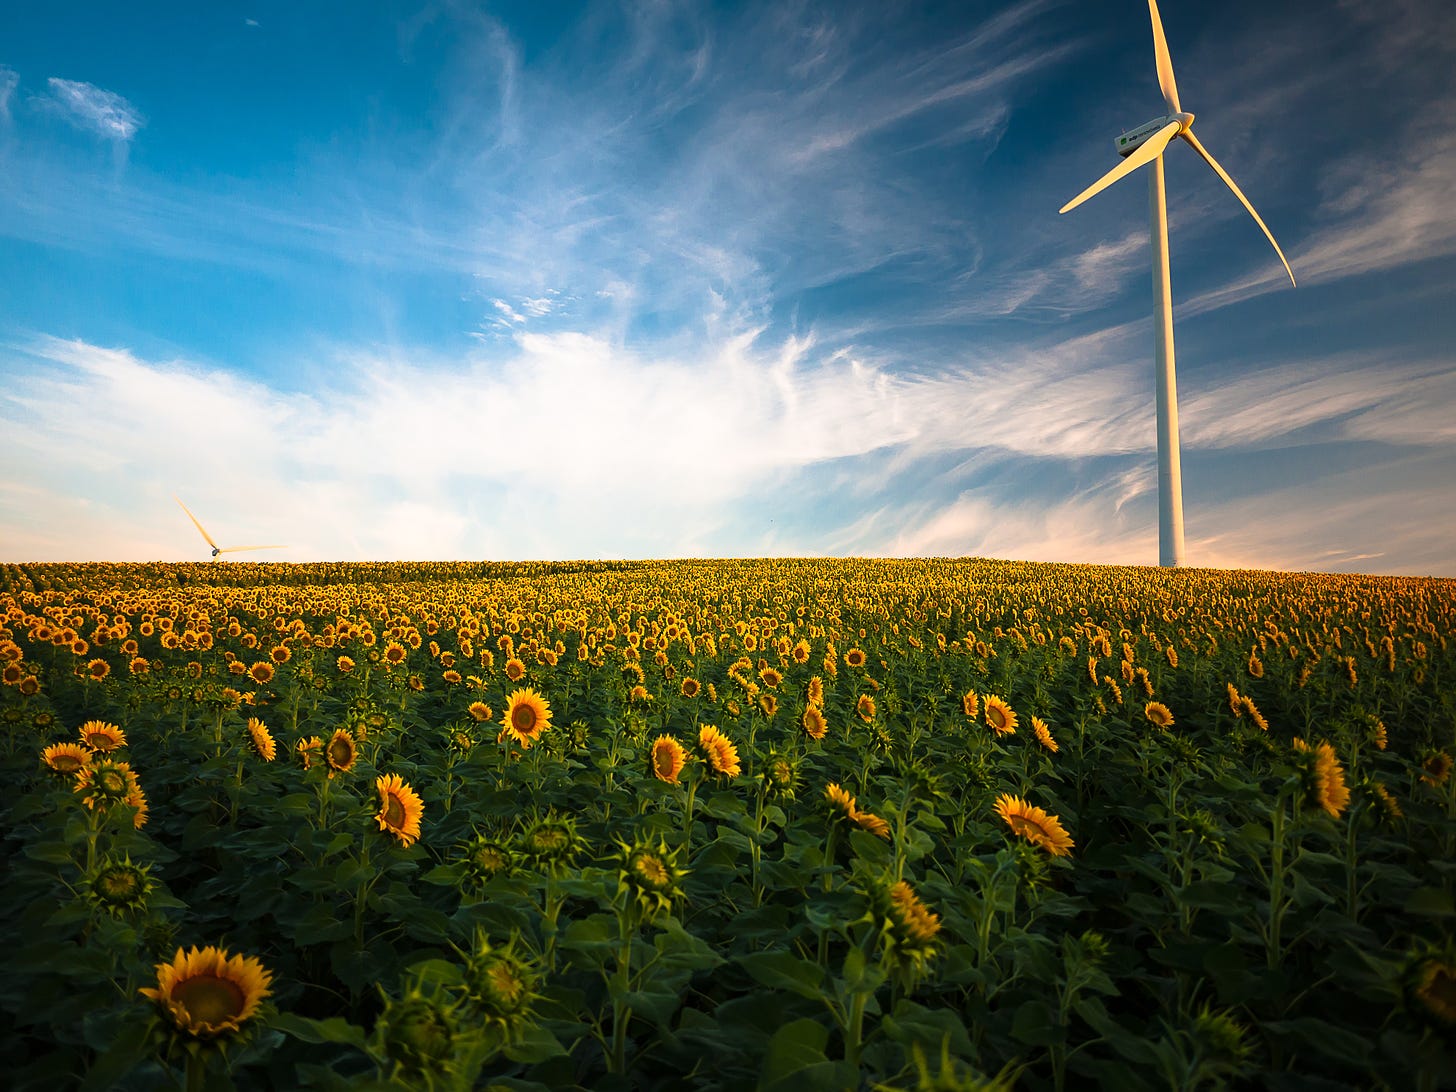 field of sunflowers with modern windmill towering in the far distant right, into a sky filled with white whispy clouds